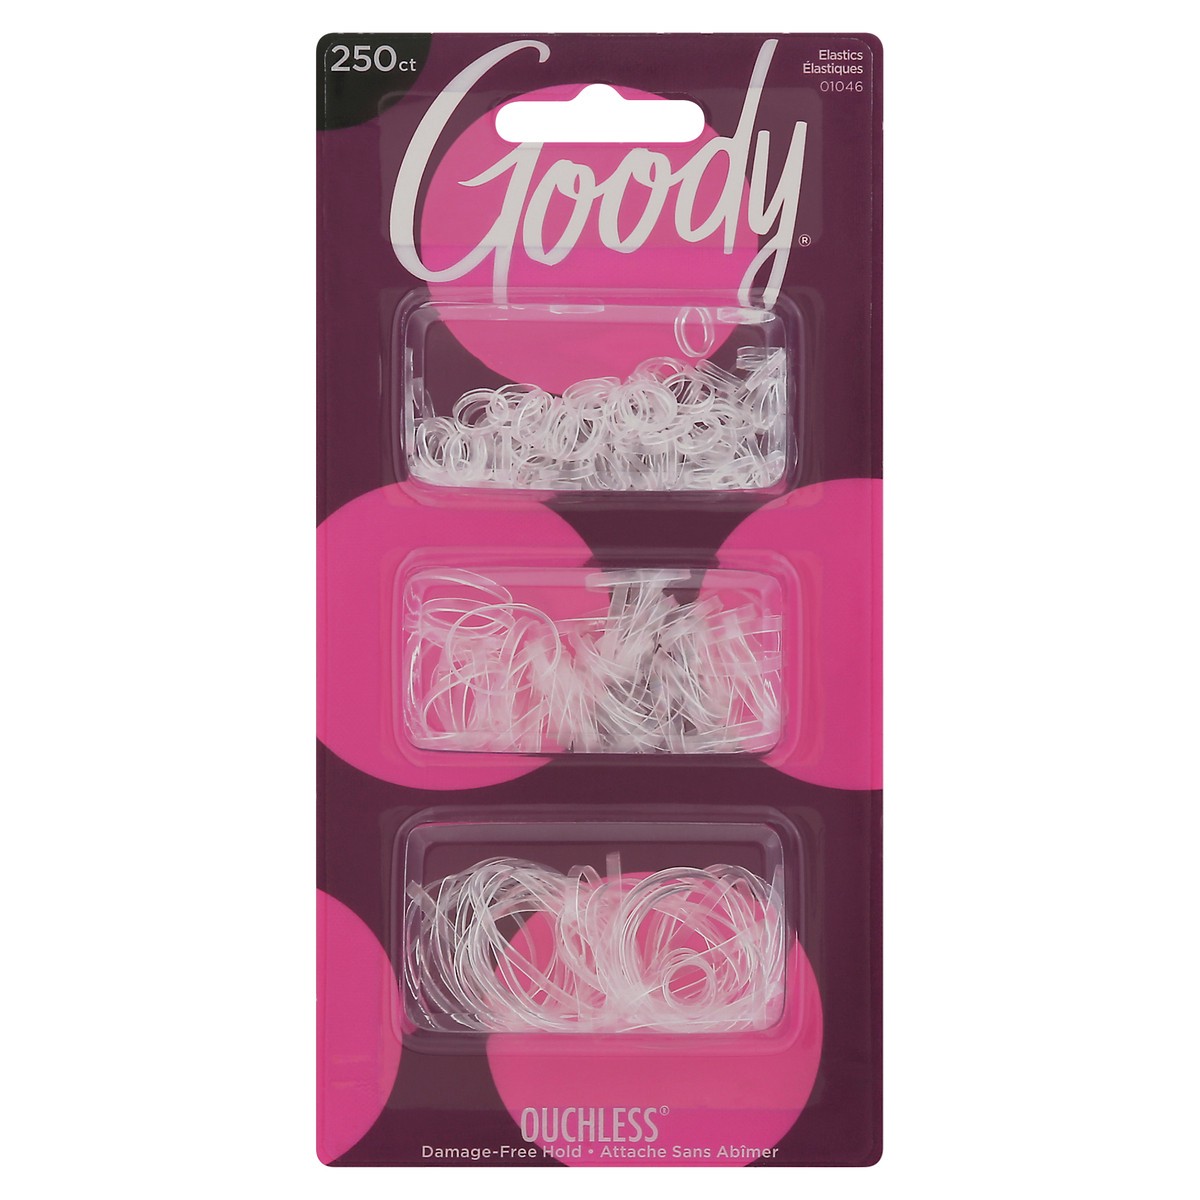 slide 1 of 9, Goody Ouchless Elastics 250 ea, 250 ct